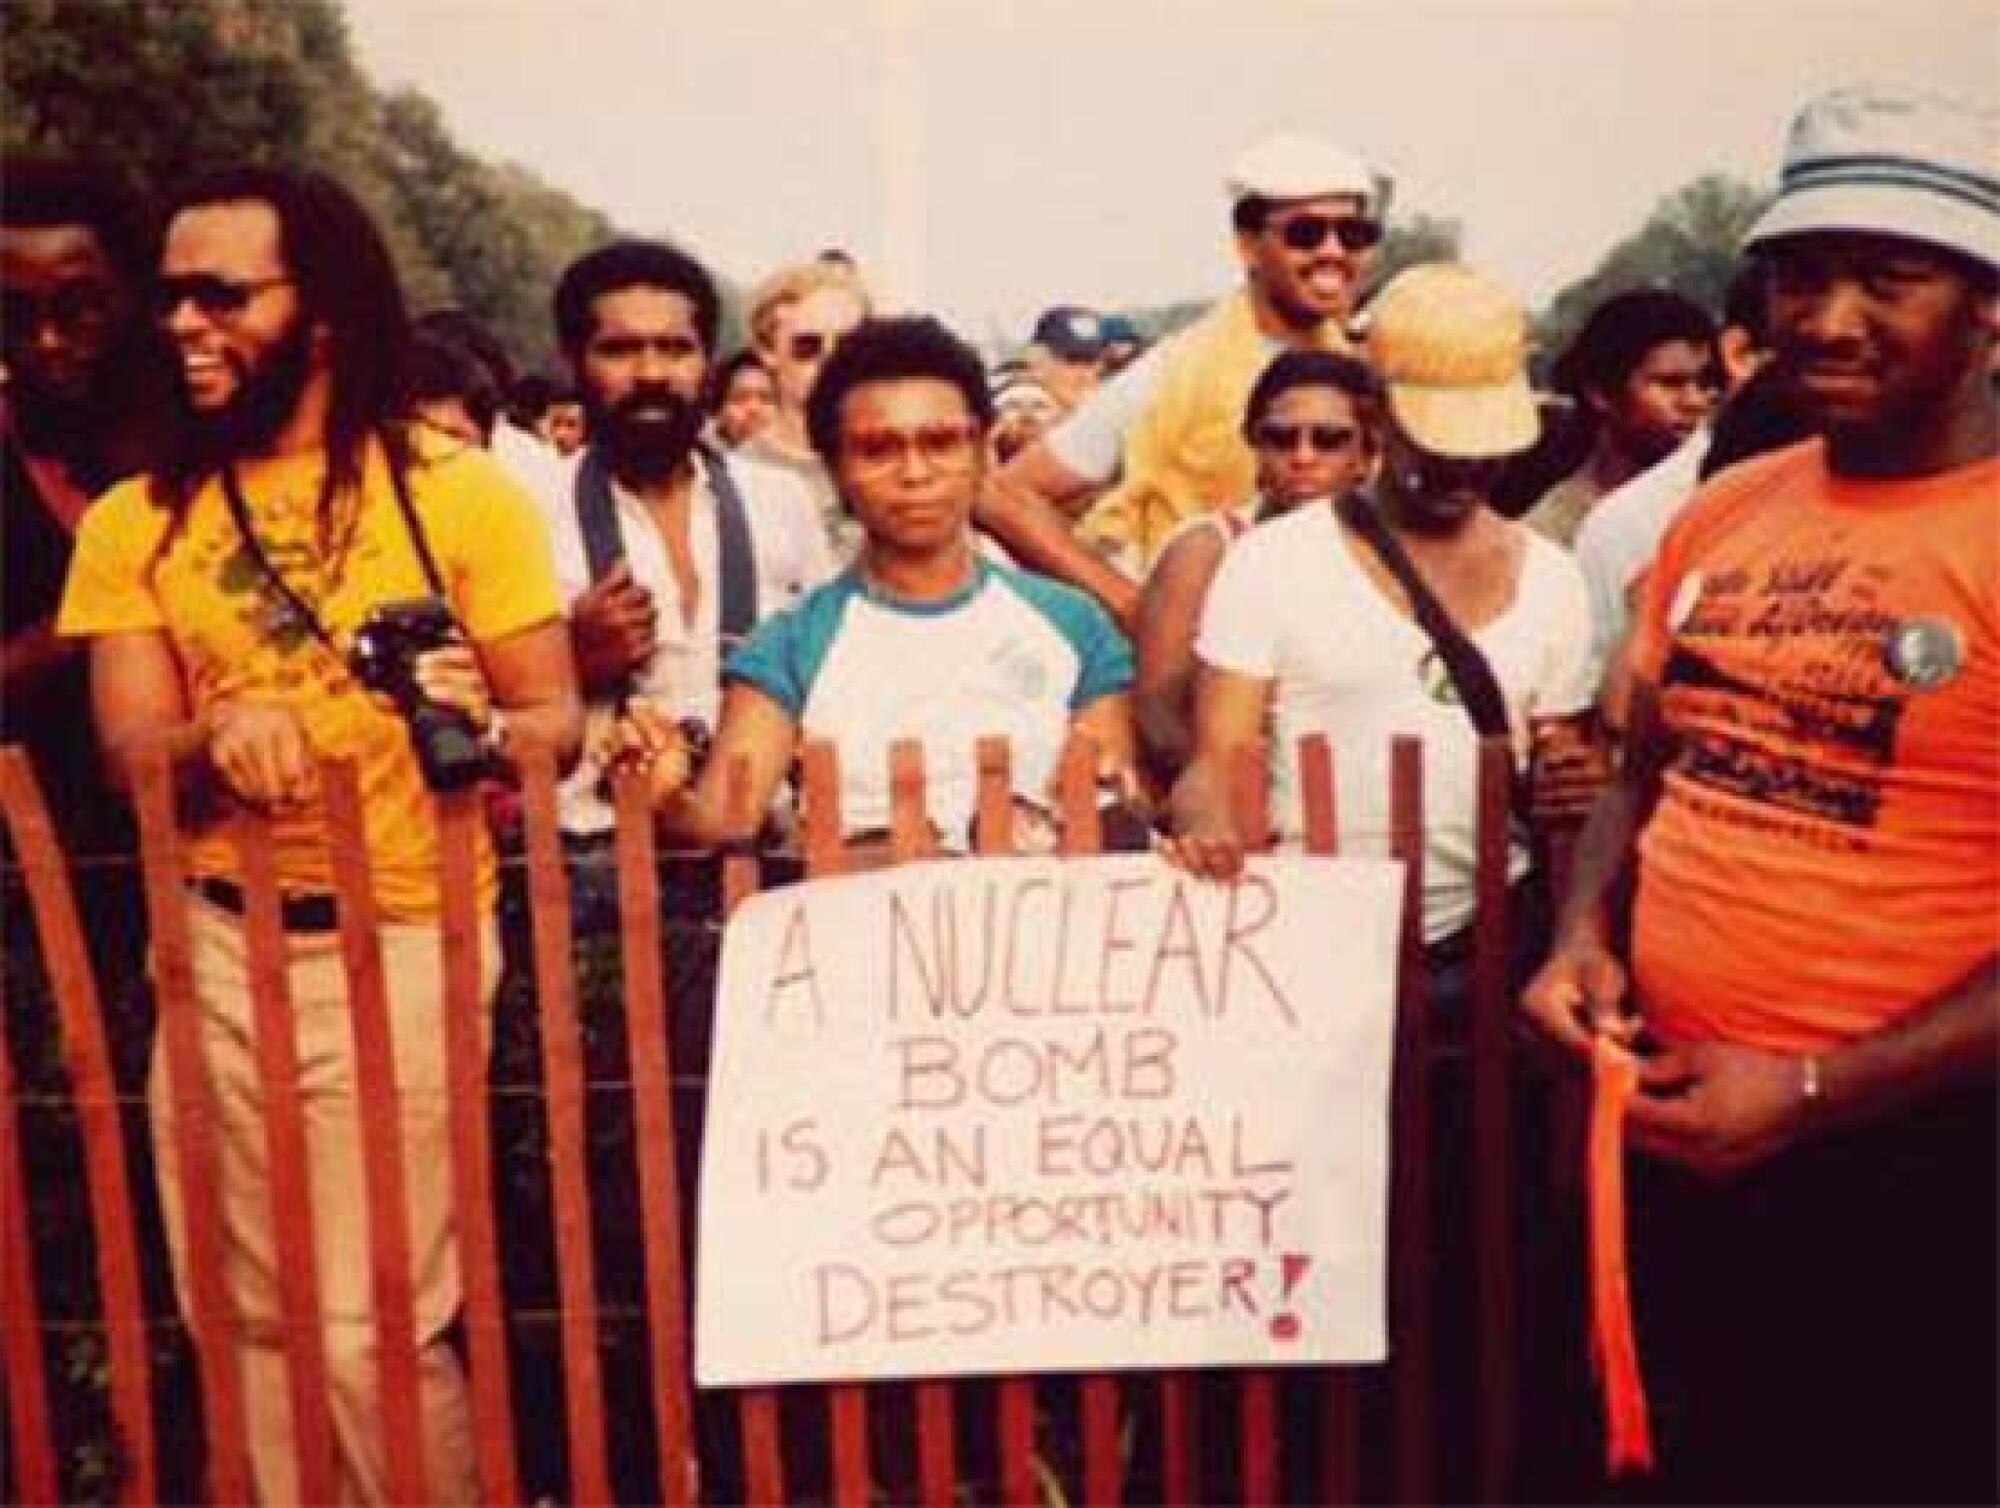 Barbara Lee surrounded by other people behind a fence in 1978